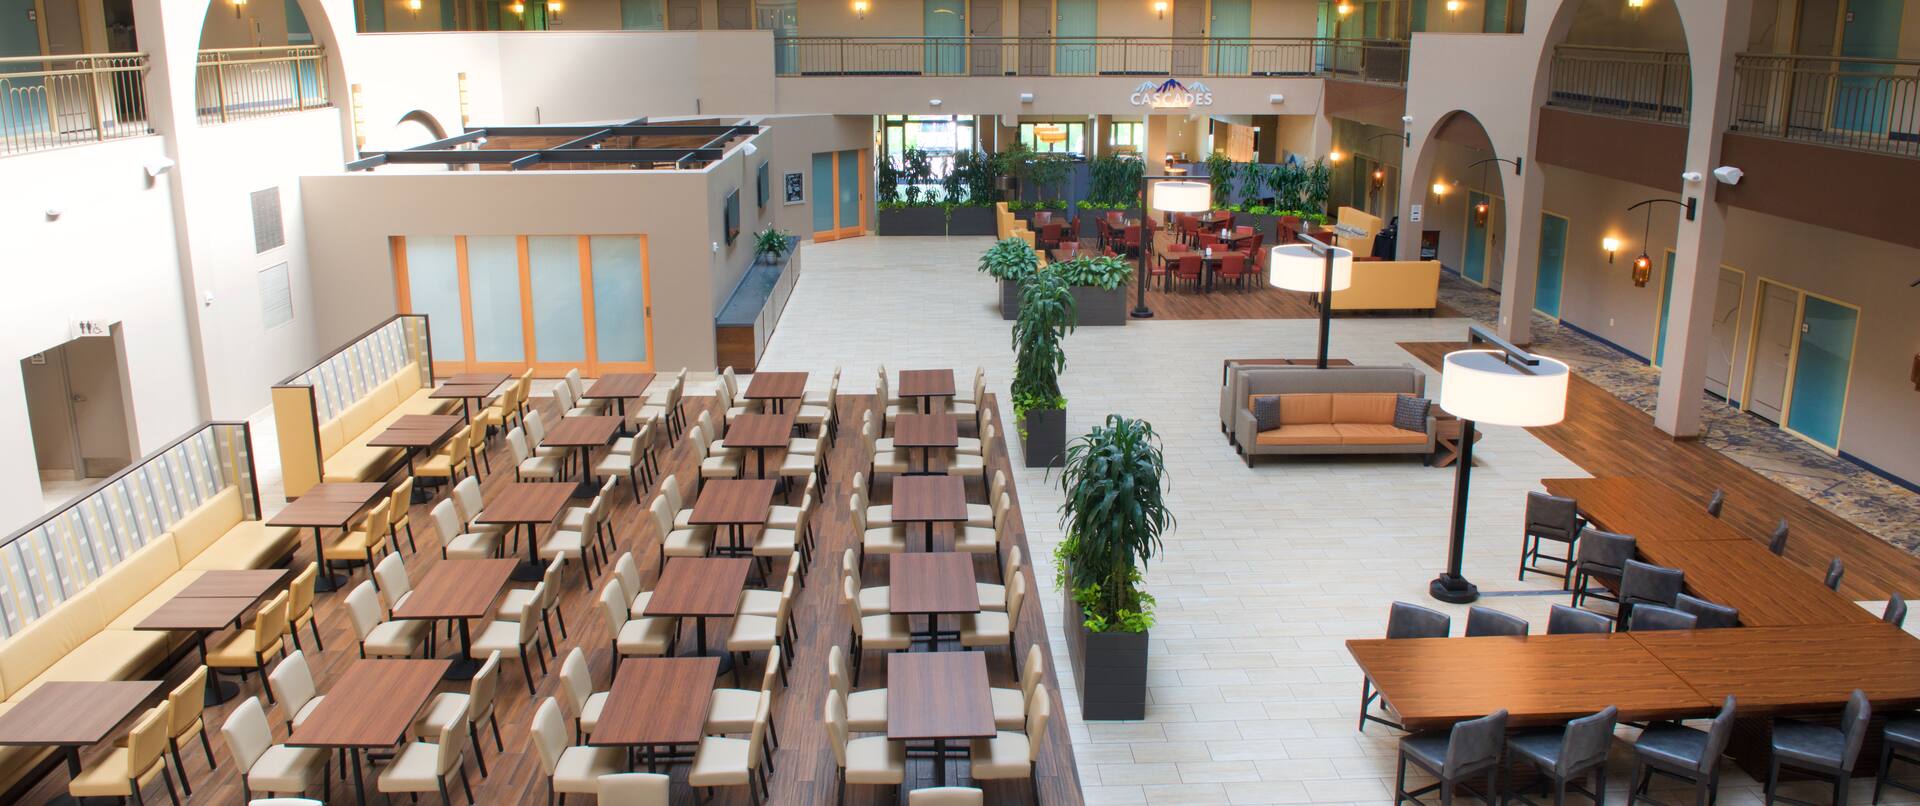 North Atrium with Tables and Chairs